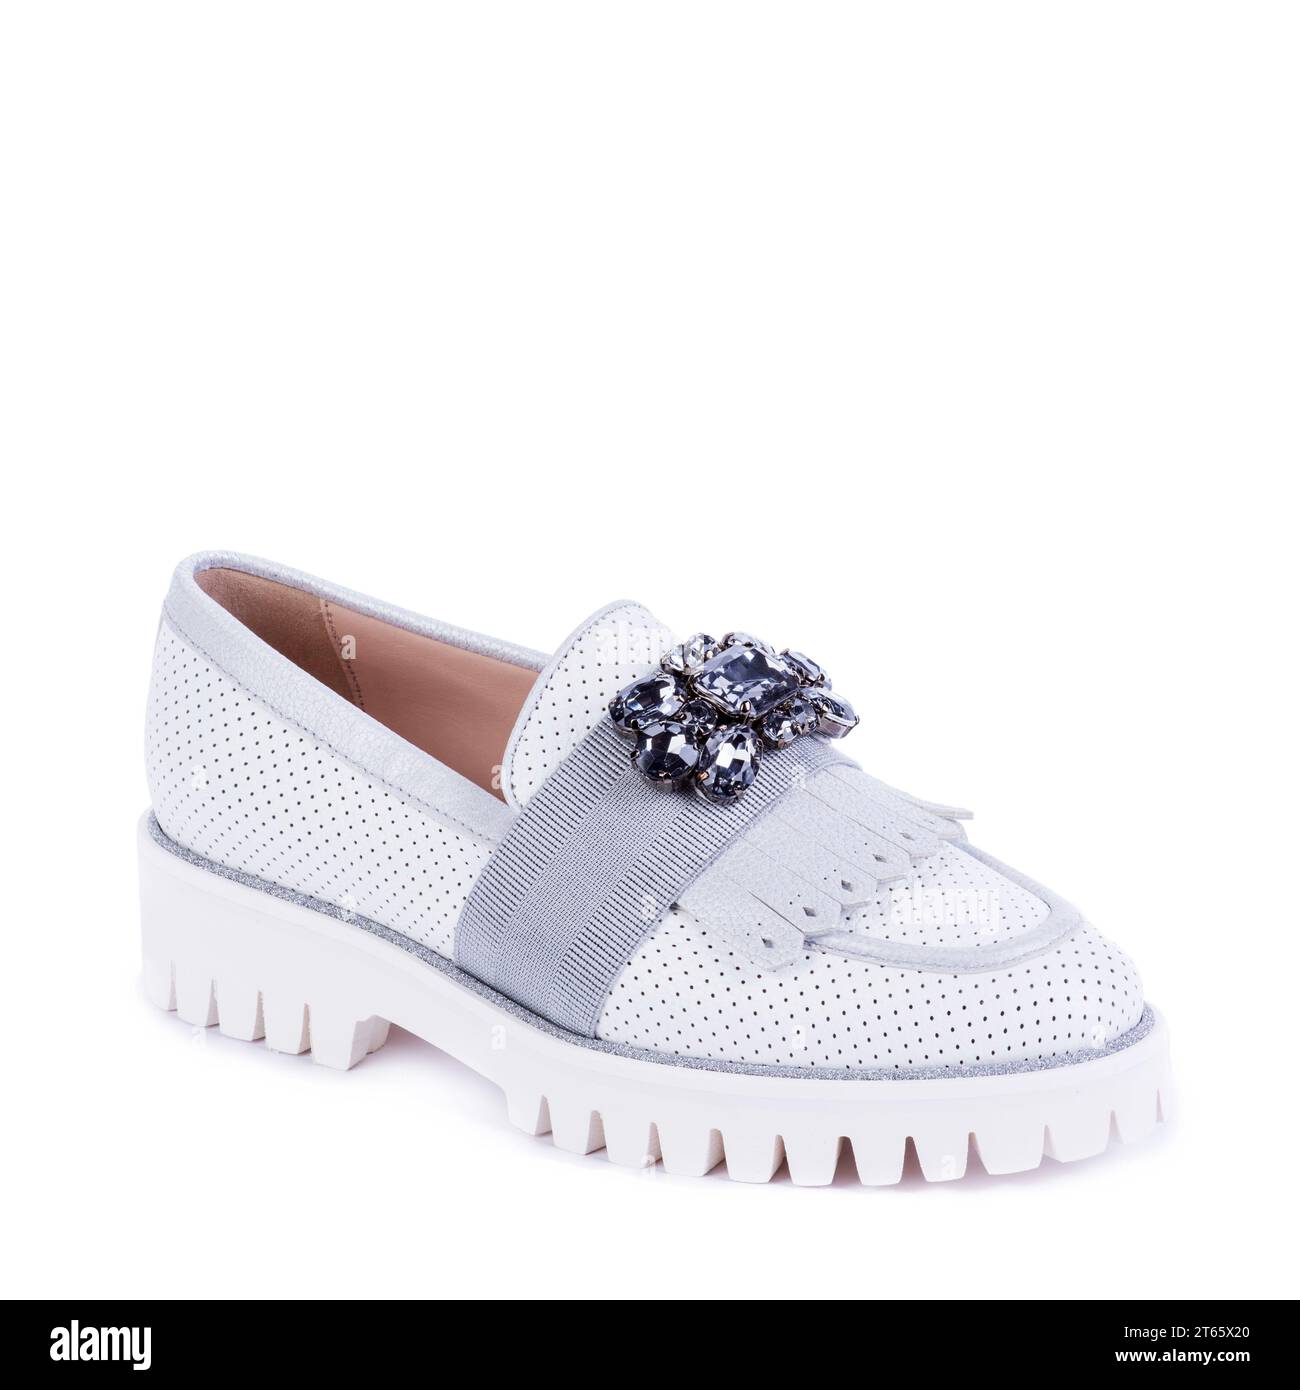 White perforated leather loafer whith ribbed sole on white background. Fashion blog. Seasonal footwear promotion. Retail, e-commerce store Stock Photo